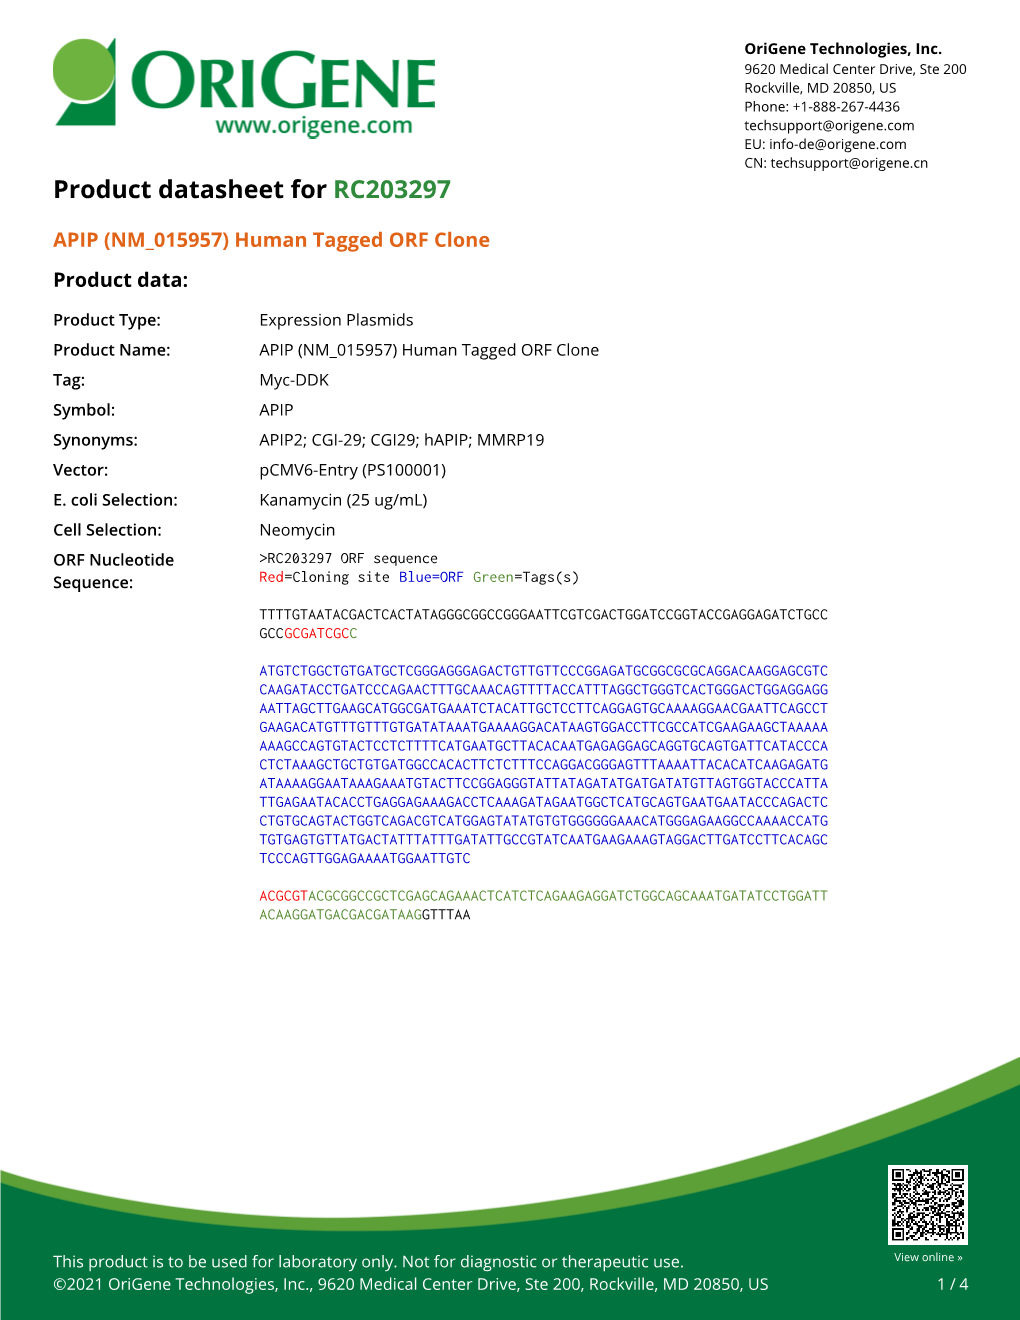 APIP (NM 015957) Human Tagged ORF Clone Product Data